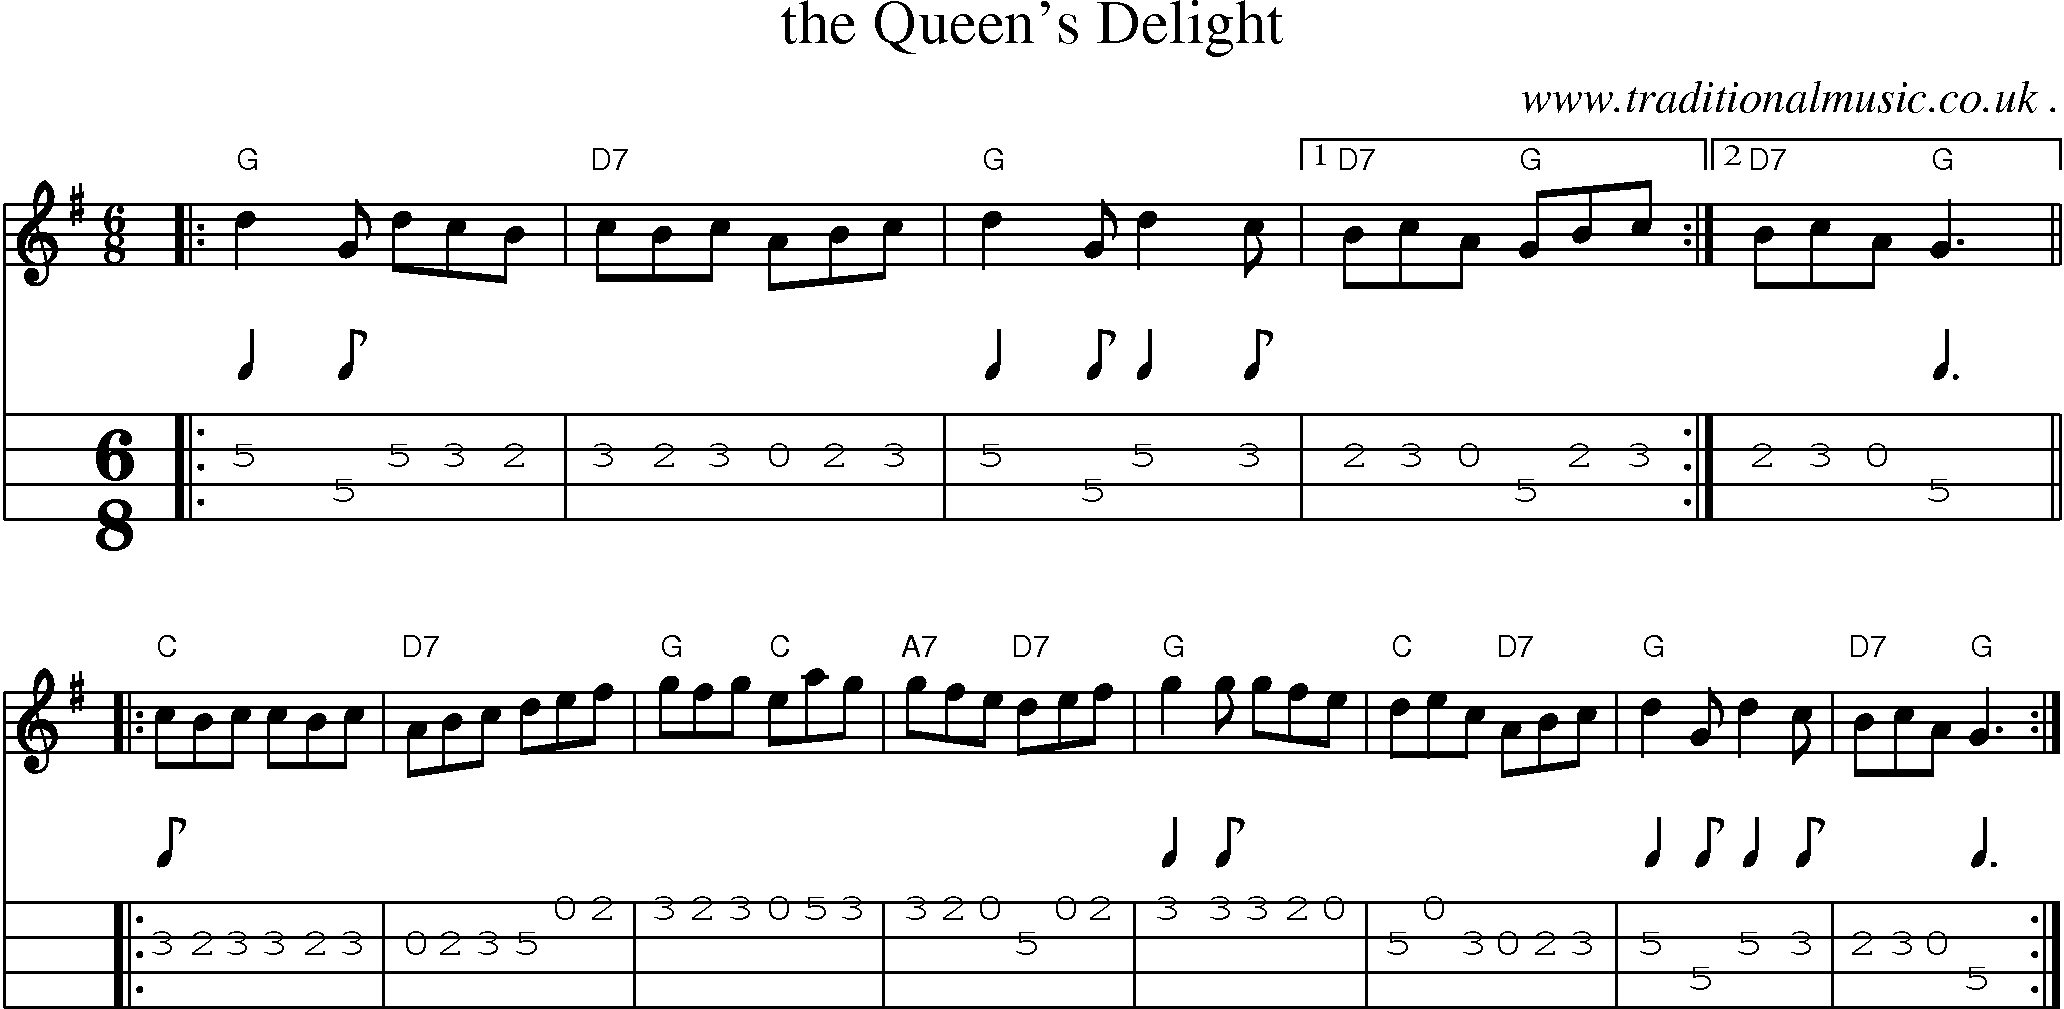 Sheet-music  score, Chords and Mandolin Tabs for The Queens Delight